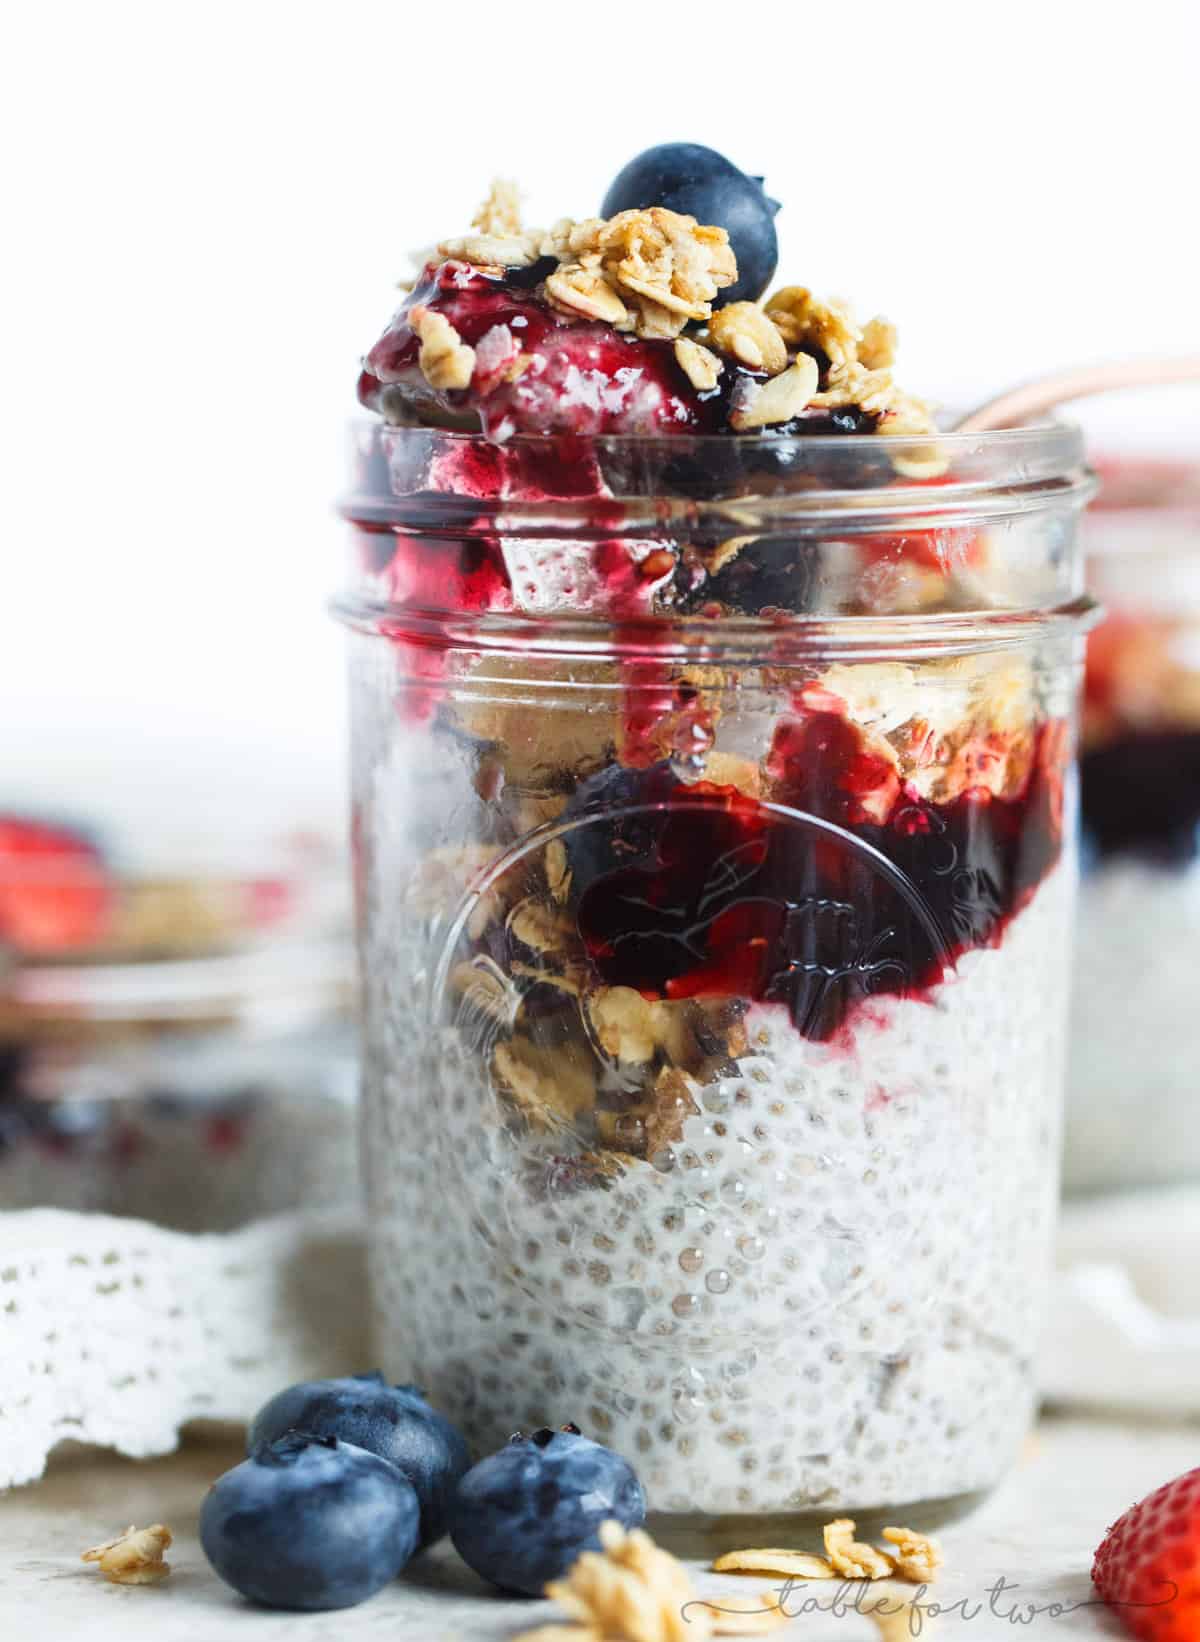 Coconut chia seed pudding with berries and granola is an easy breakfast option packed with flavor and nutrients! It's loaded with fiber, protein, Omega-3 fatty acids and various micronutrients!